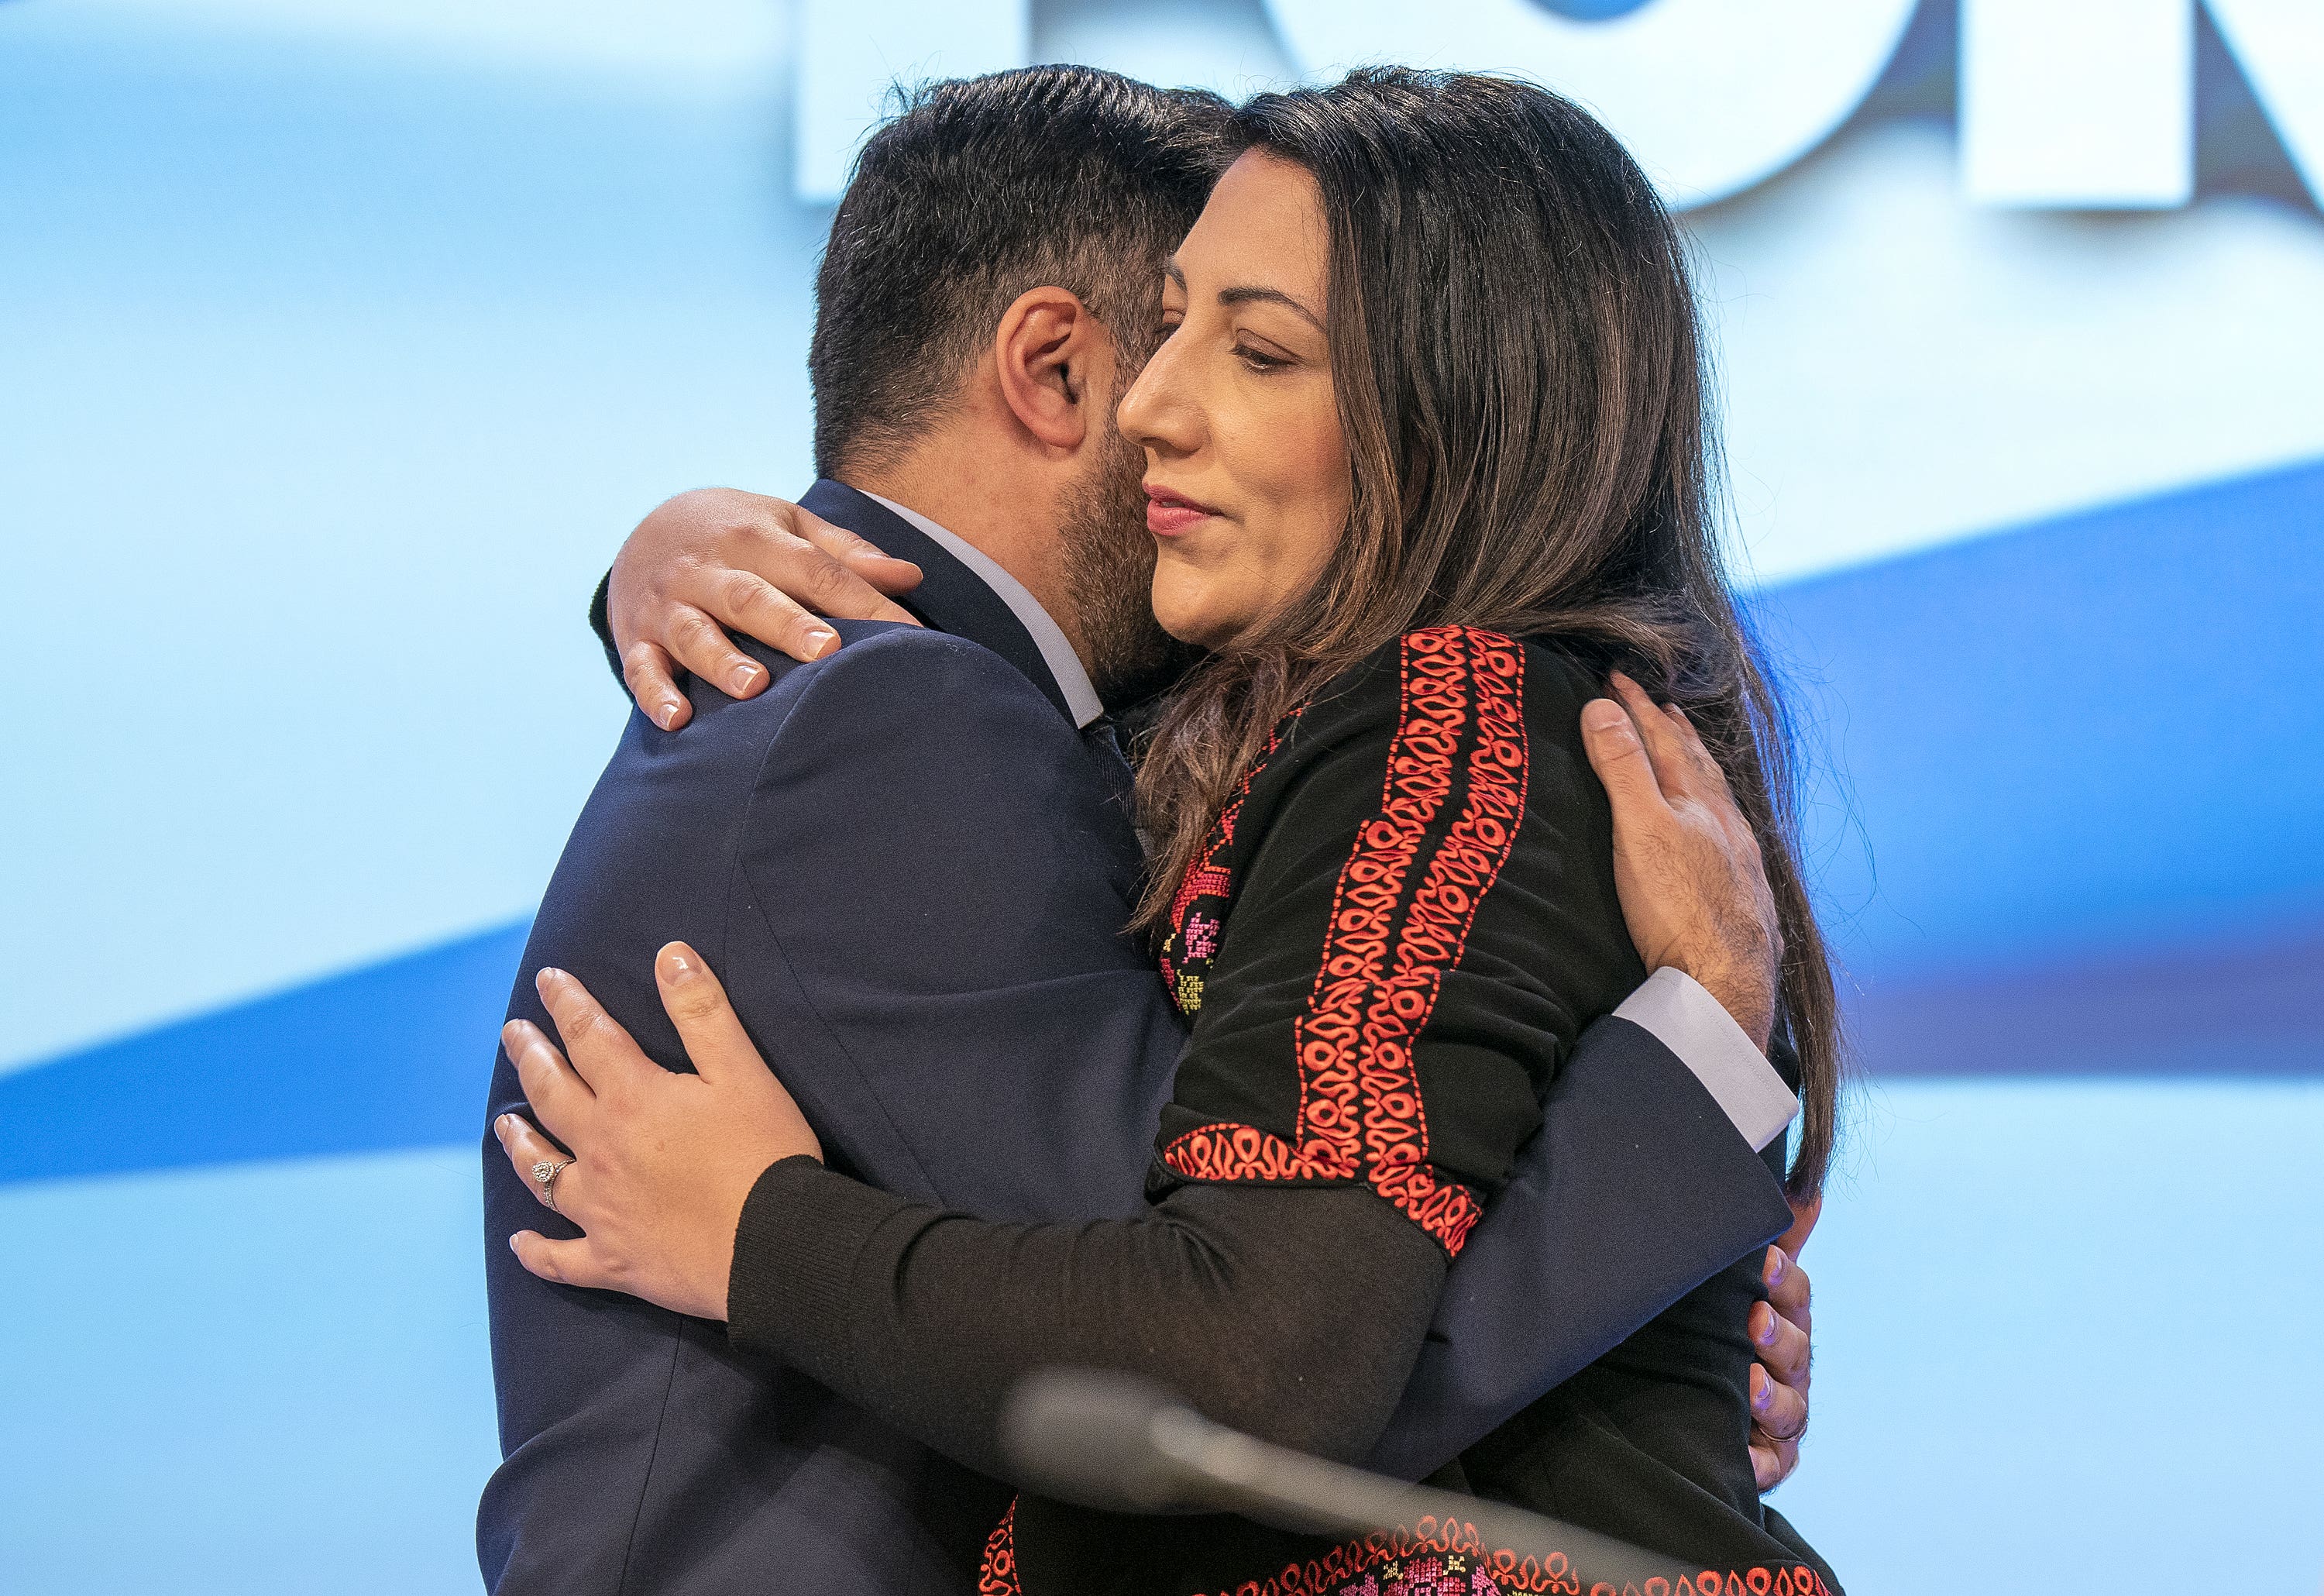 Nadia El-Nakla was embraced by her husband Humza Yousaf on stage a the SNP conference